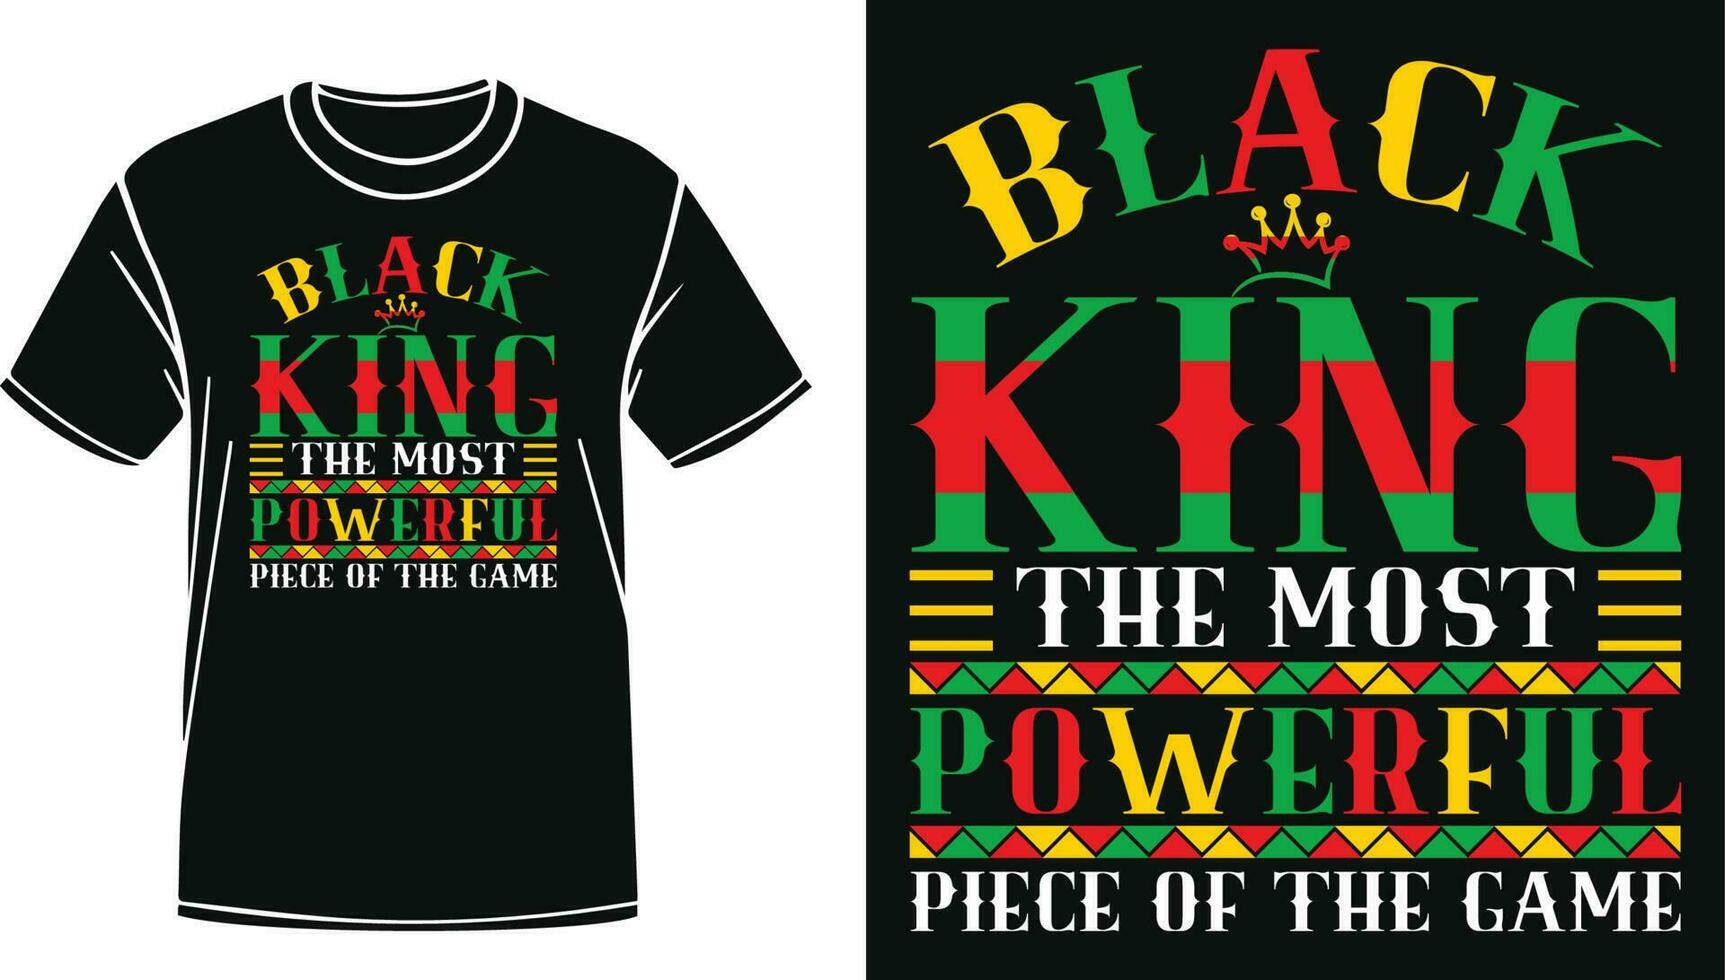 Black King The Most Powerful Juneteenth Quote Design For Tshirt, Banner, Poster, Mug, Hoodie vector